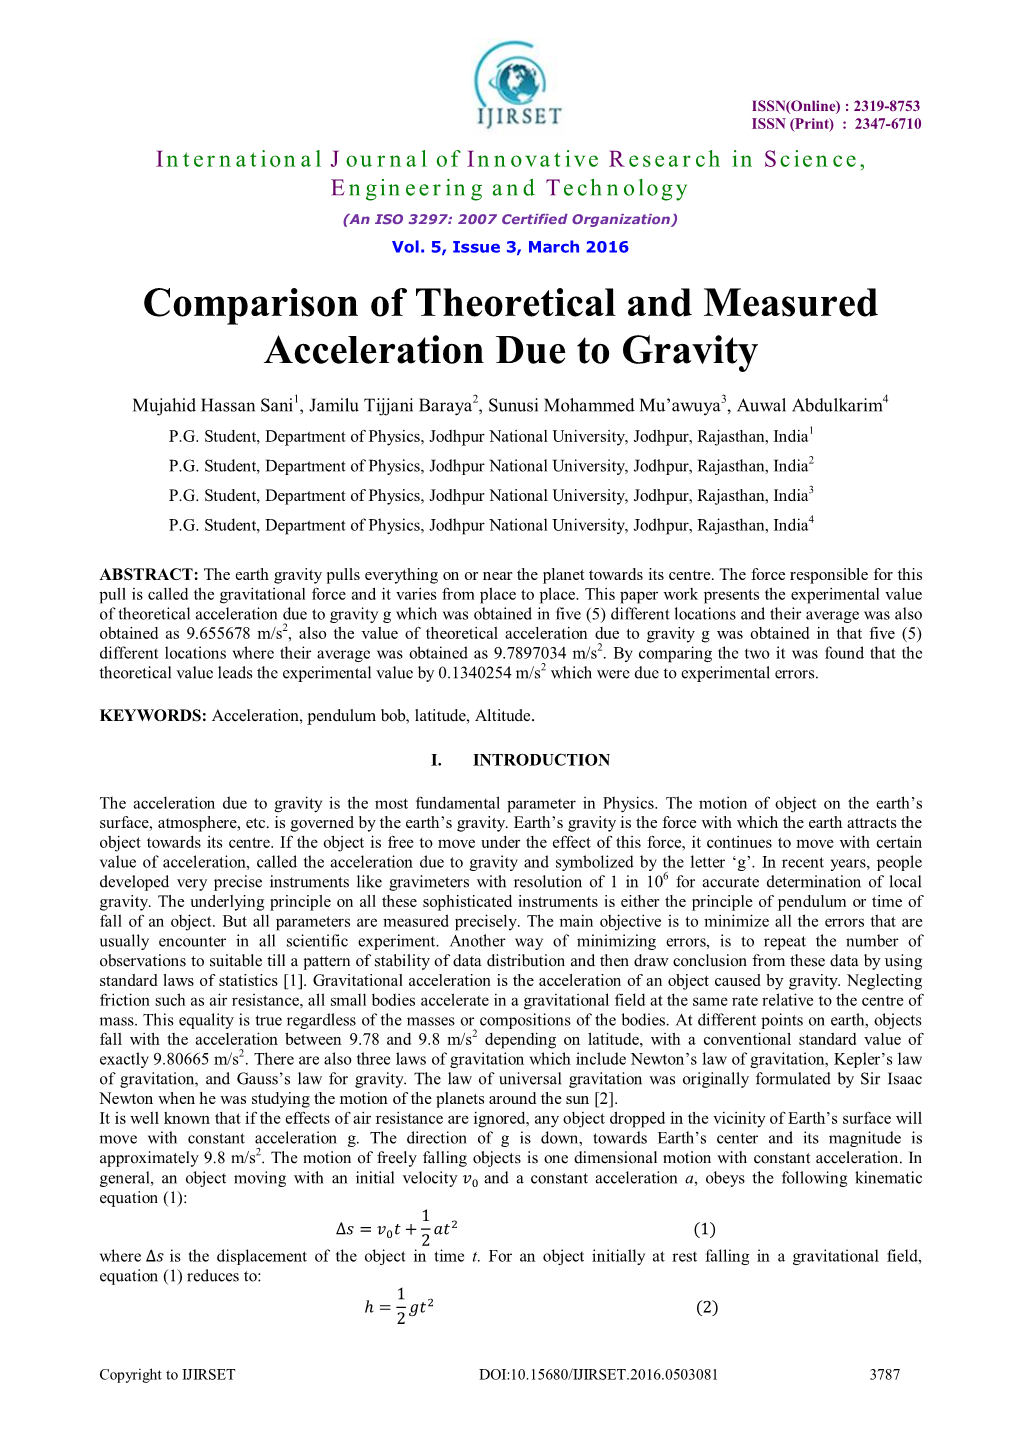 Comparison of Theoretical and Measured Acceleration Due to Gravity